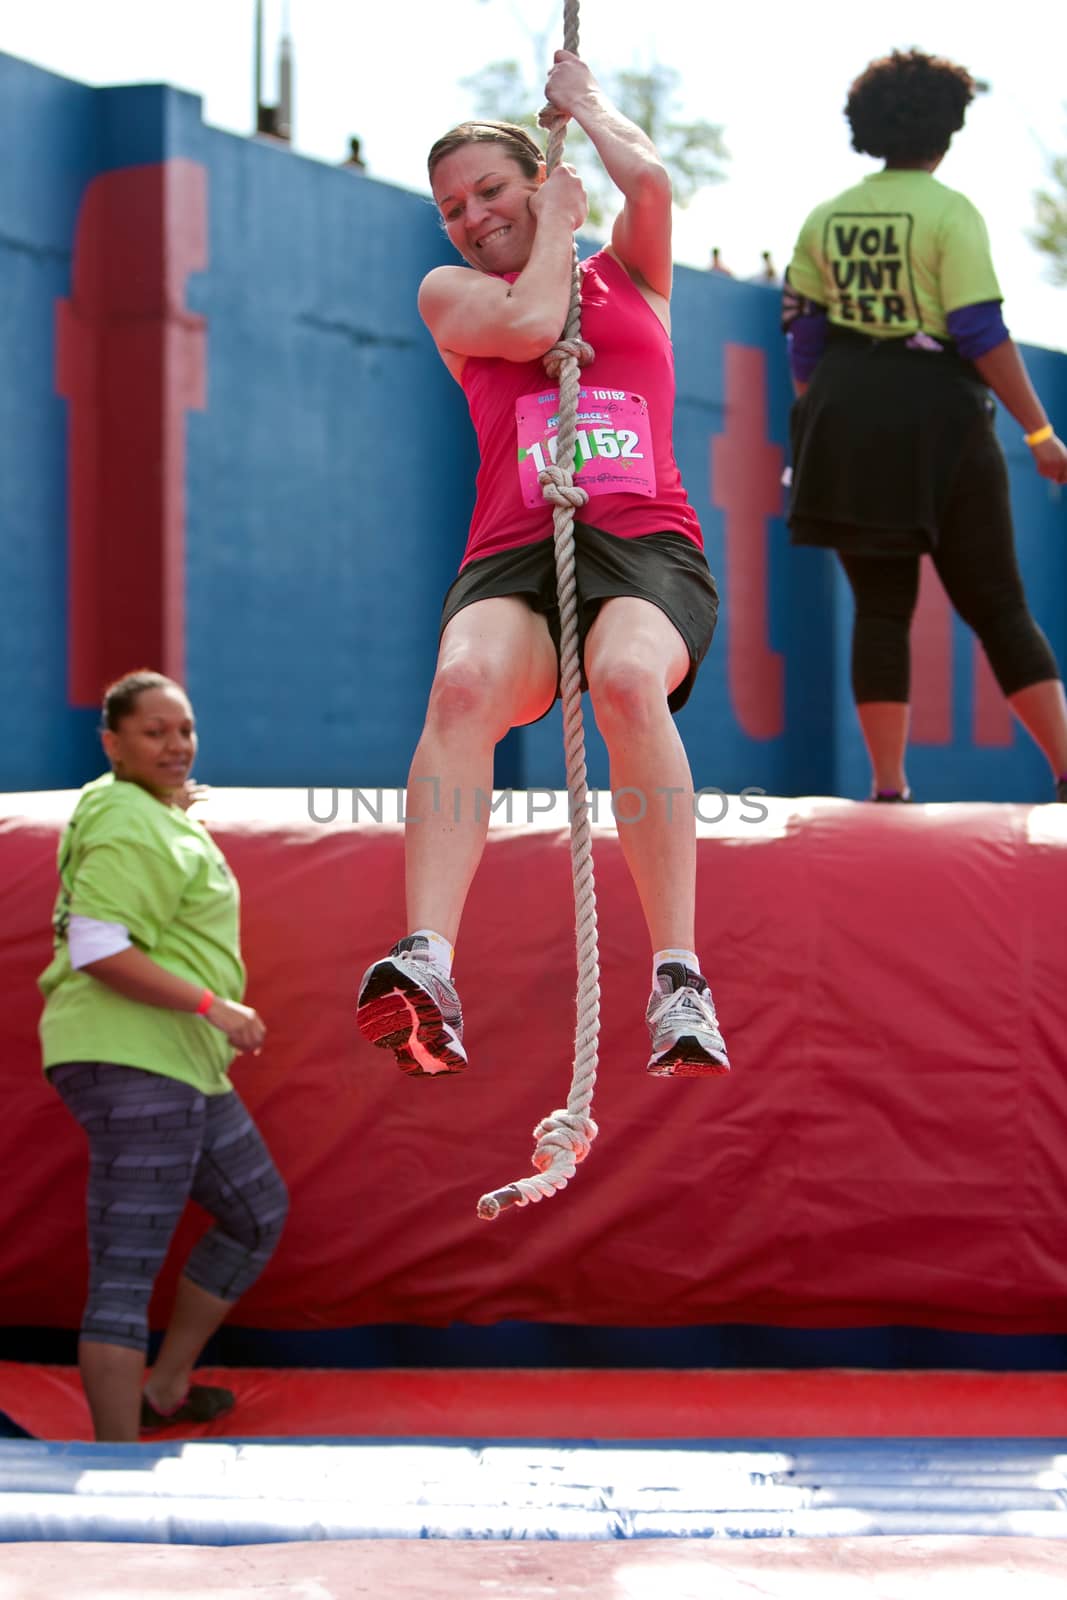 Young Woman Swings With Rope In Crazy Obstacle Race by BluIz60